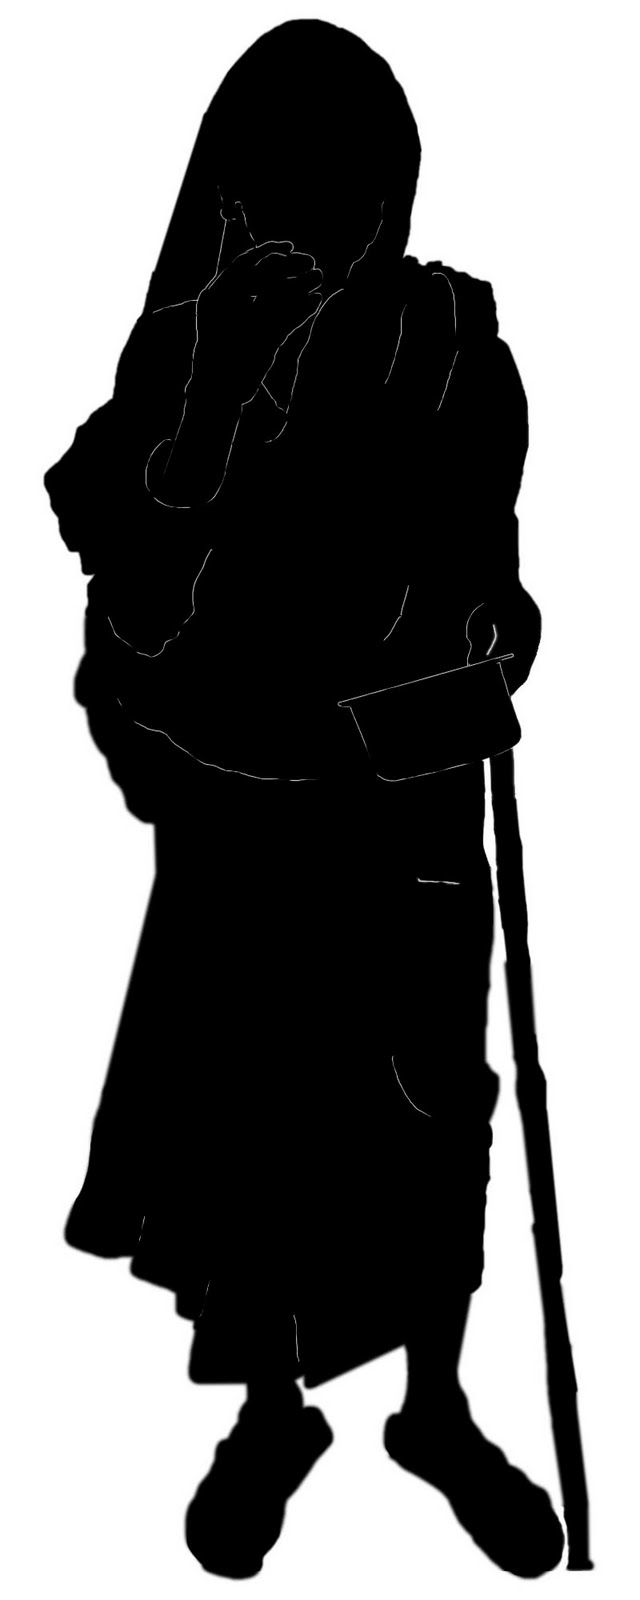 Download Indian Woman Silhouette at GetDrawings.com | Free for personal use Indian Woman Silhouette of ...